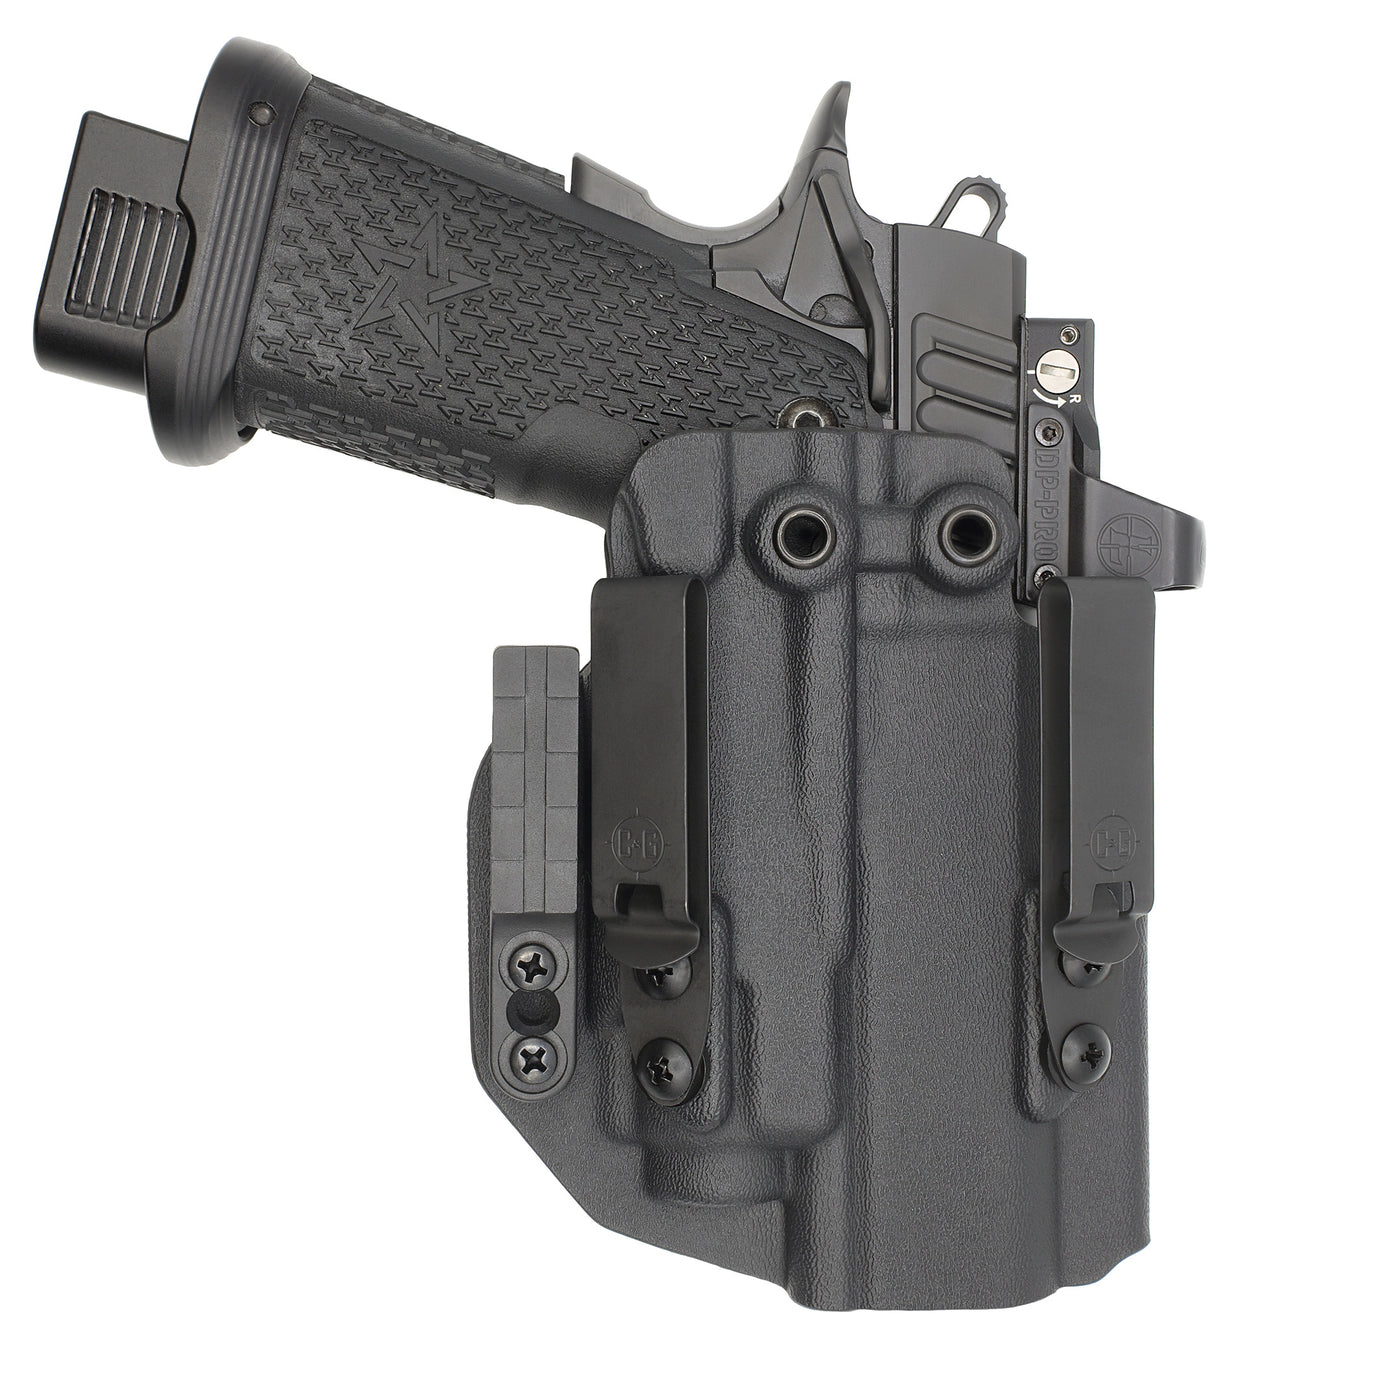 C&G Holsters Quickship IWB ALPHA UPGRADE Tactical 1911 DS Prodigy streamlight TLR8 holstered